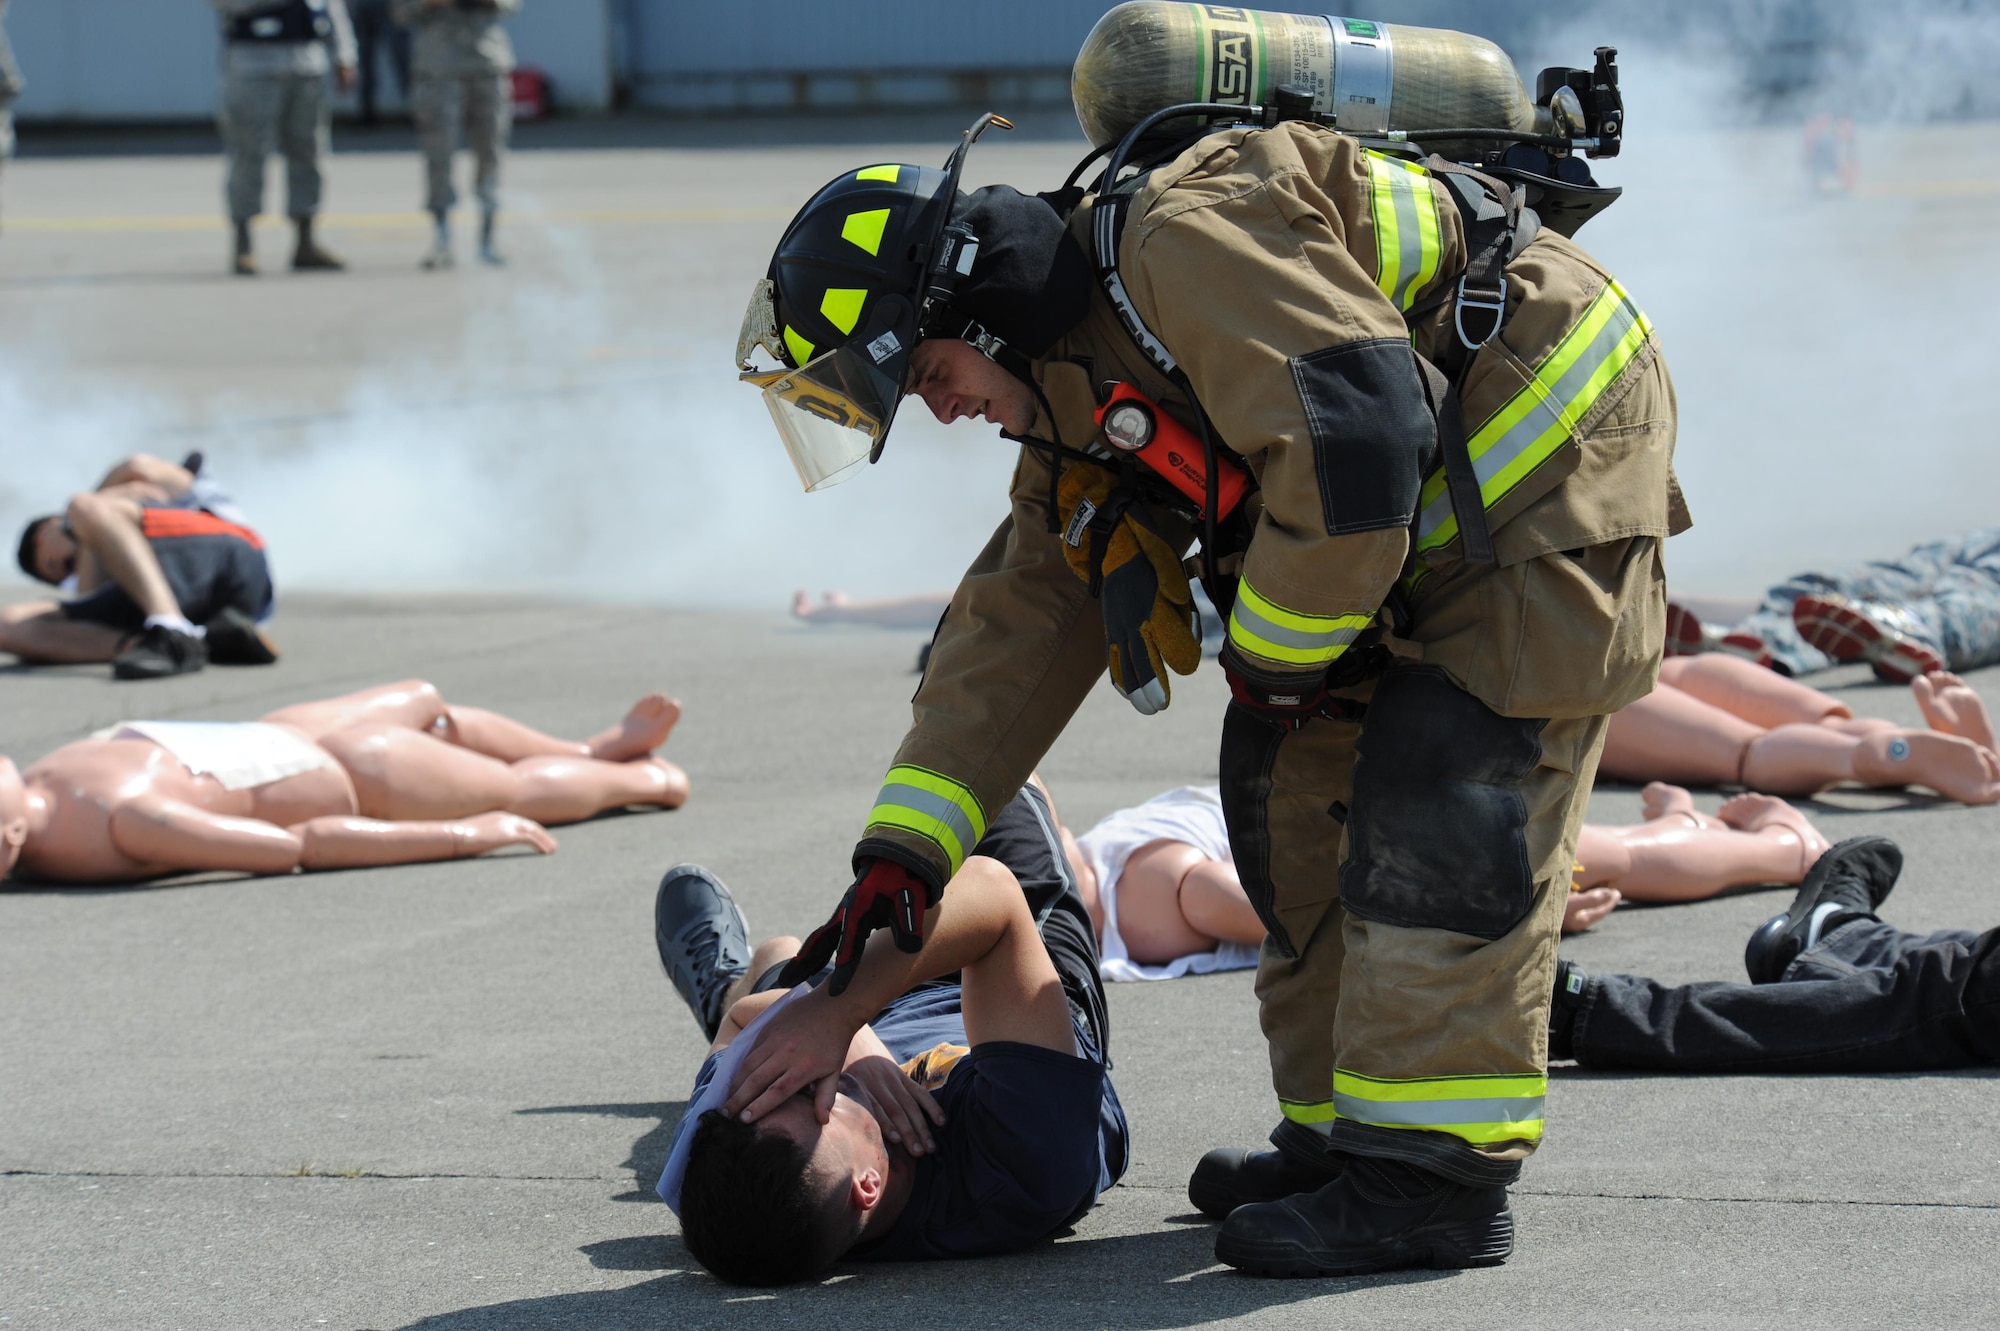 U.S. Air Force Airman 1st Class Brandon Cotham, a fireman assigned to the 35th Civil Engineer Squadron, conducts a patient assessment during a bilateral emergency management exercise at Misawa Air Base, Japan, Aug. 31, 2016. Firemen assessed patient damage and escorted them to a safe zone. (U.S. Air Force photo by Tech. Sgt. April Quintanilla)